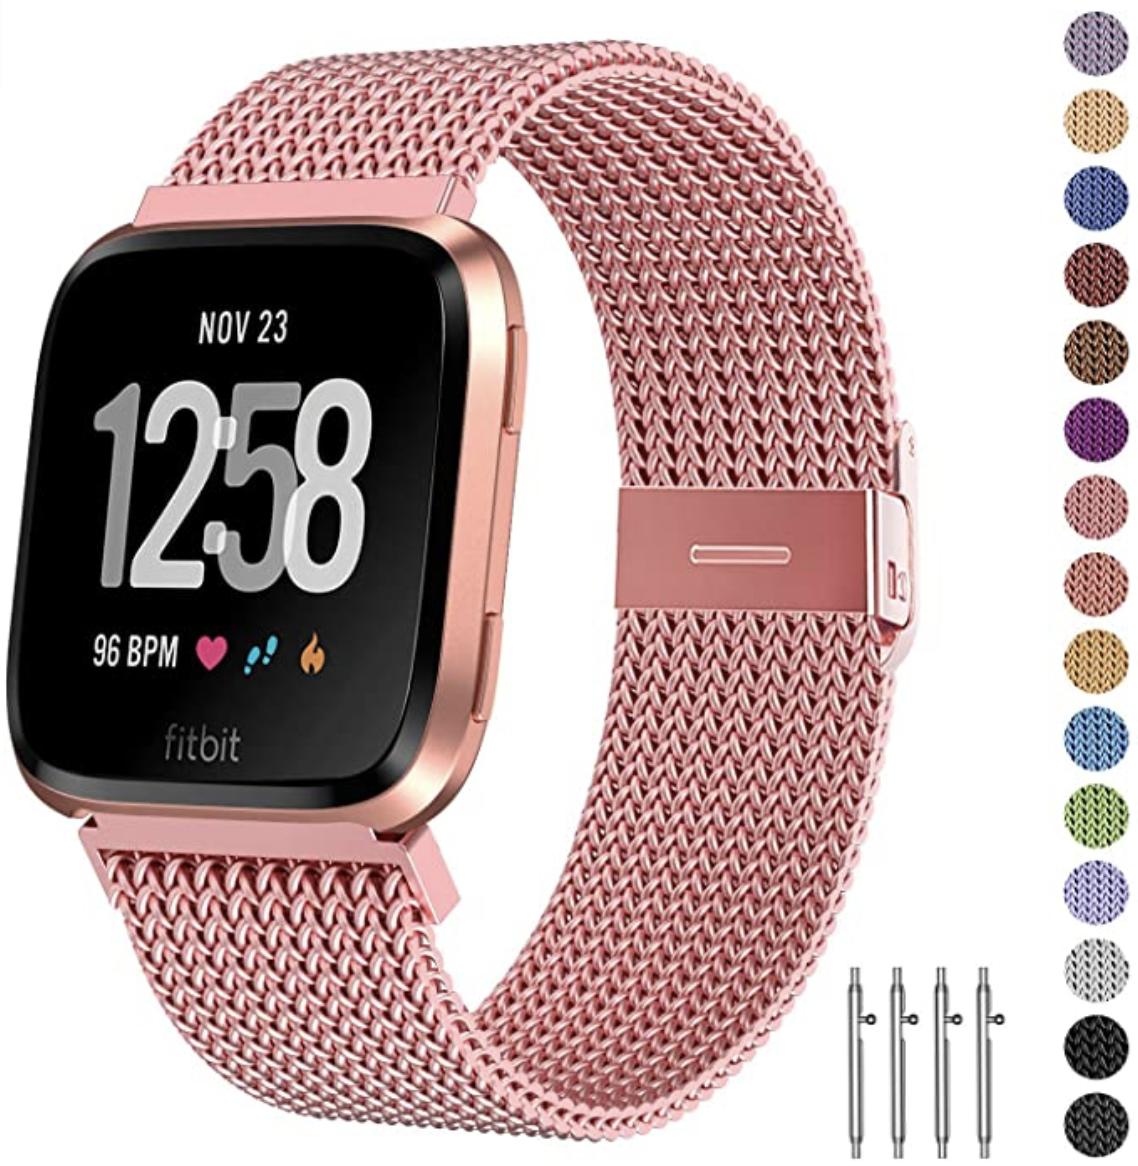 fitbit versa white band rose gold